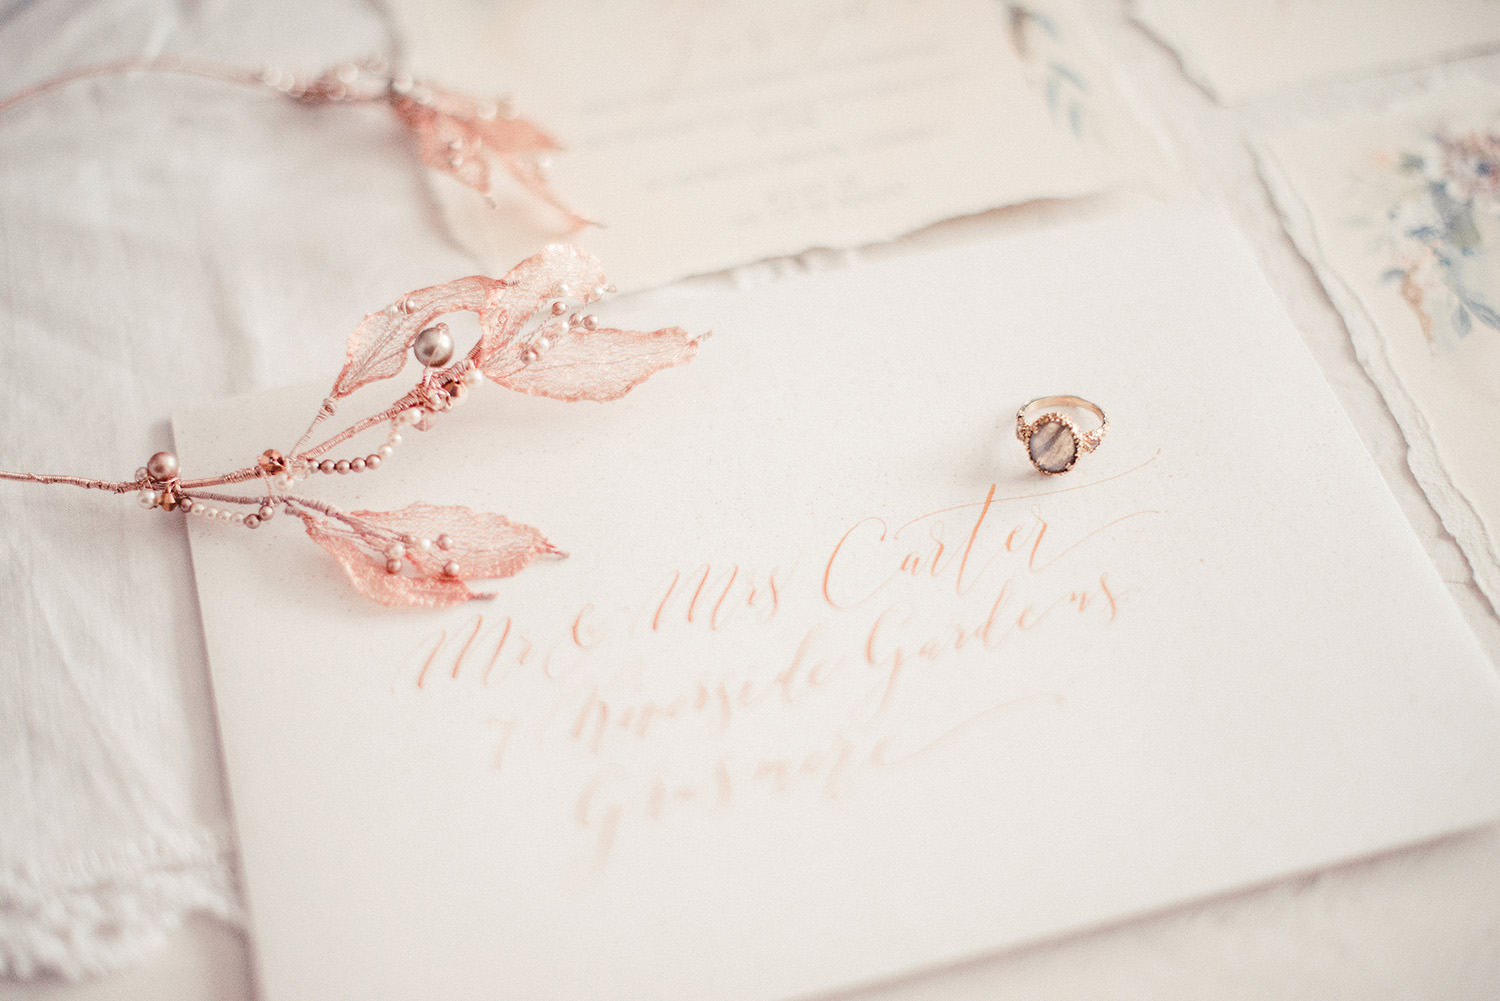 Pale rose gold calligraphy on a white envelope, with a delicate floral crown placed above, and a wedding ring on the envelope